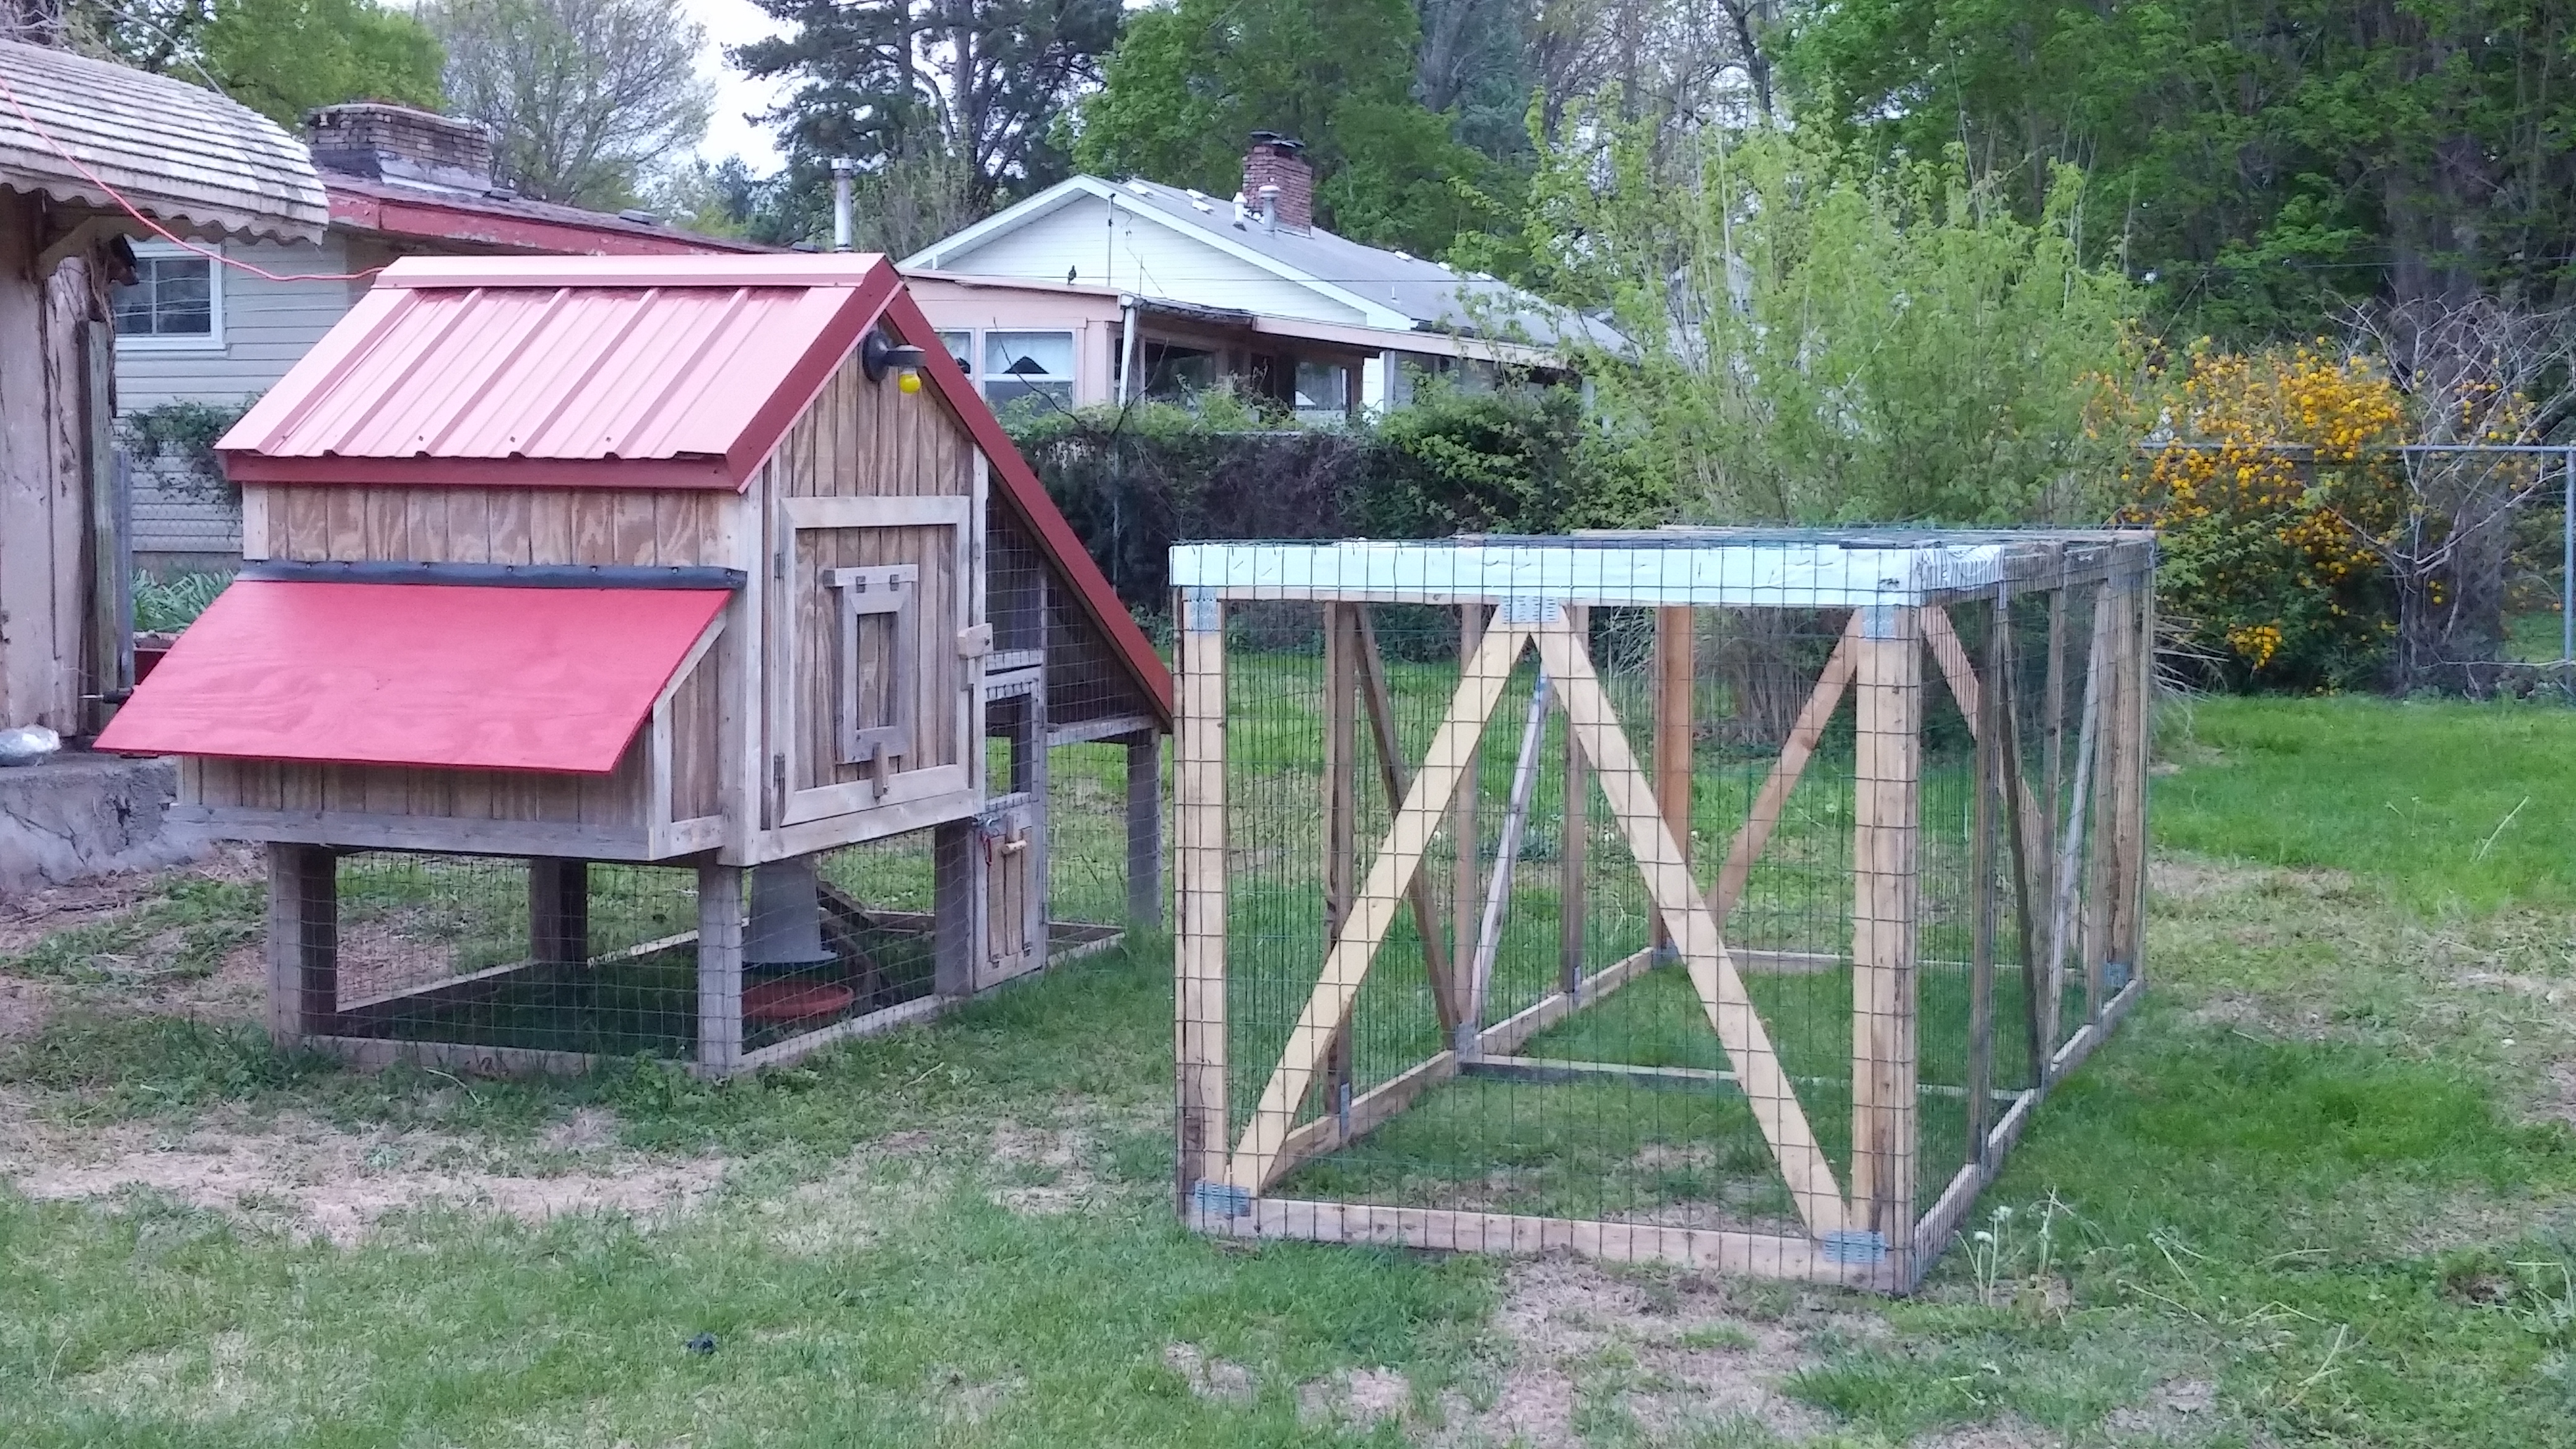 The 'new to us' chicken coop and chicken tractor project. Almost ready for the chicks! They are gonna love this upgrade from the brooder box.